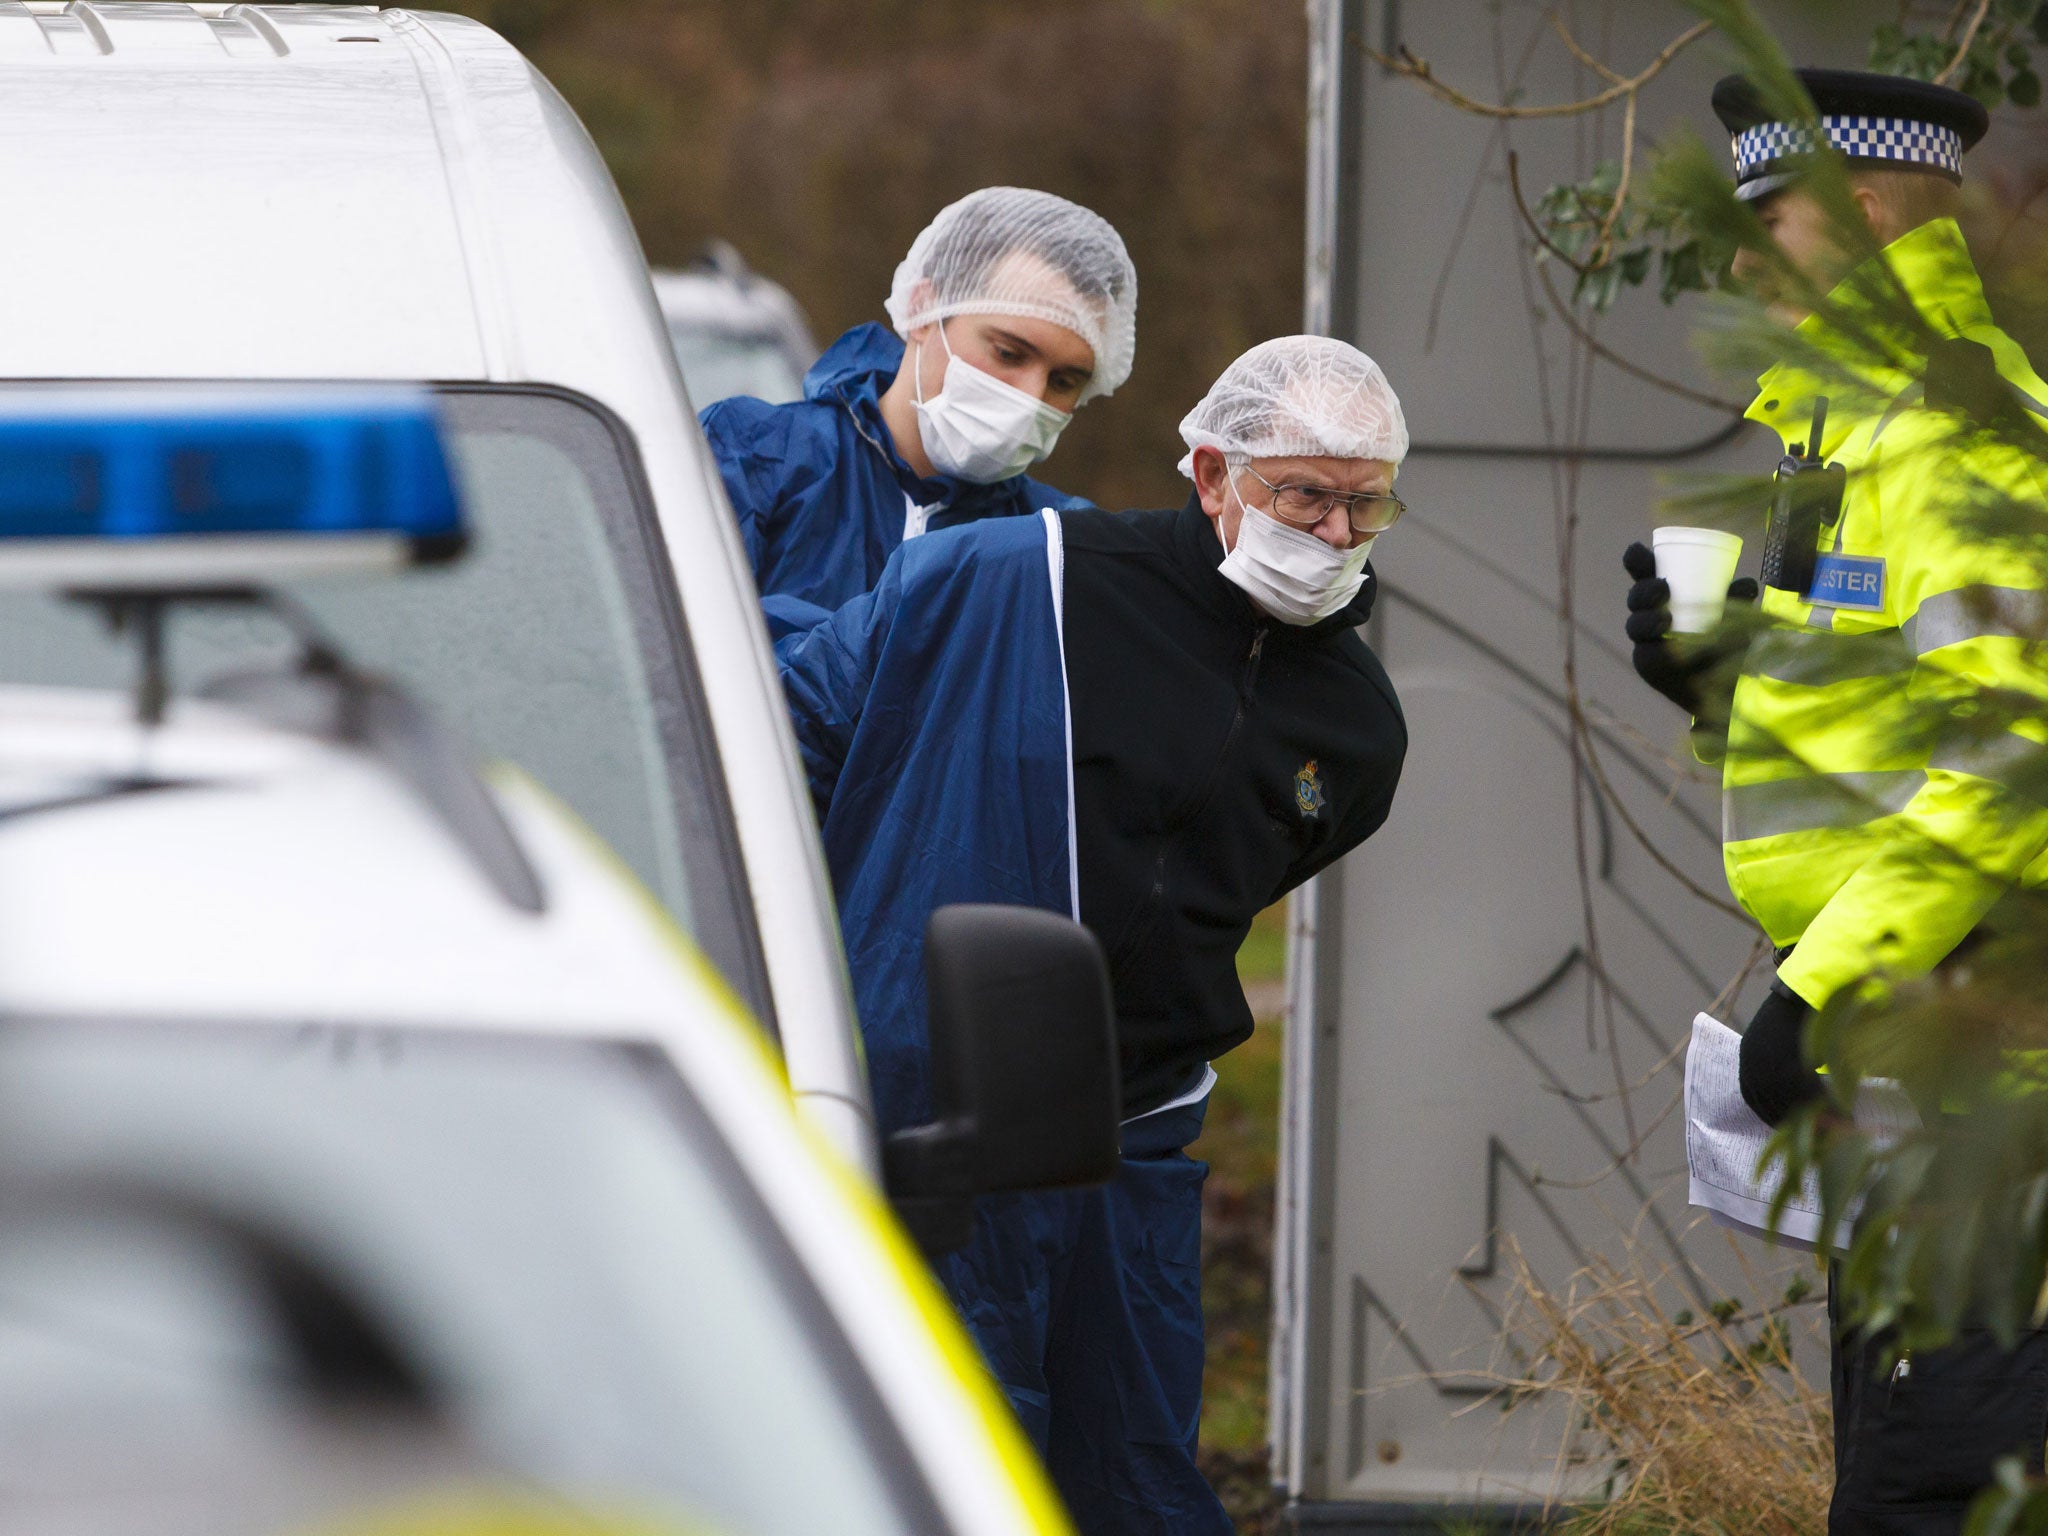 Police forensics arrive at a house in Smuggler's Lane, Bosham, West Sussex, where 55-year-old Valerie Graves was found murdered